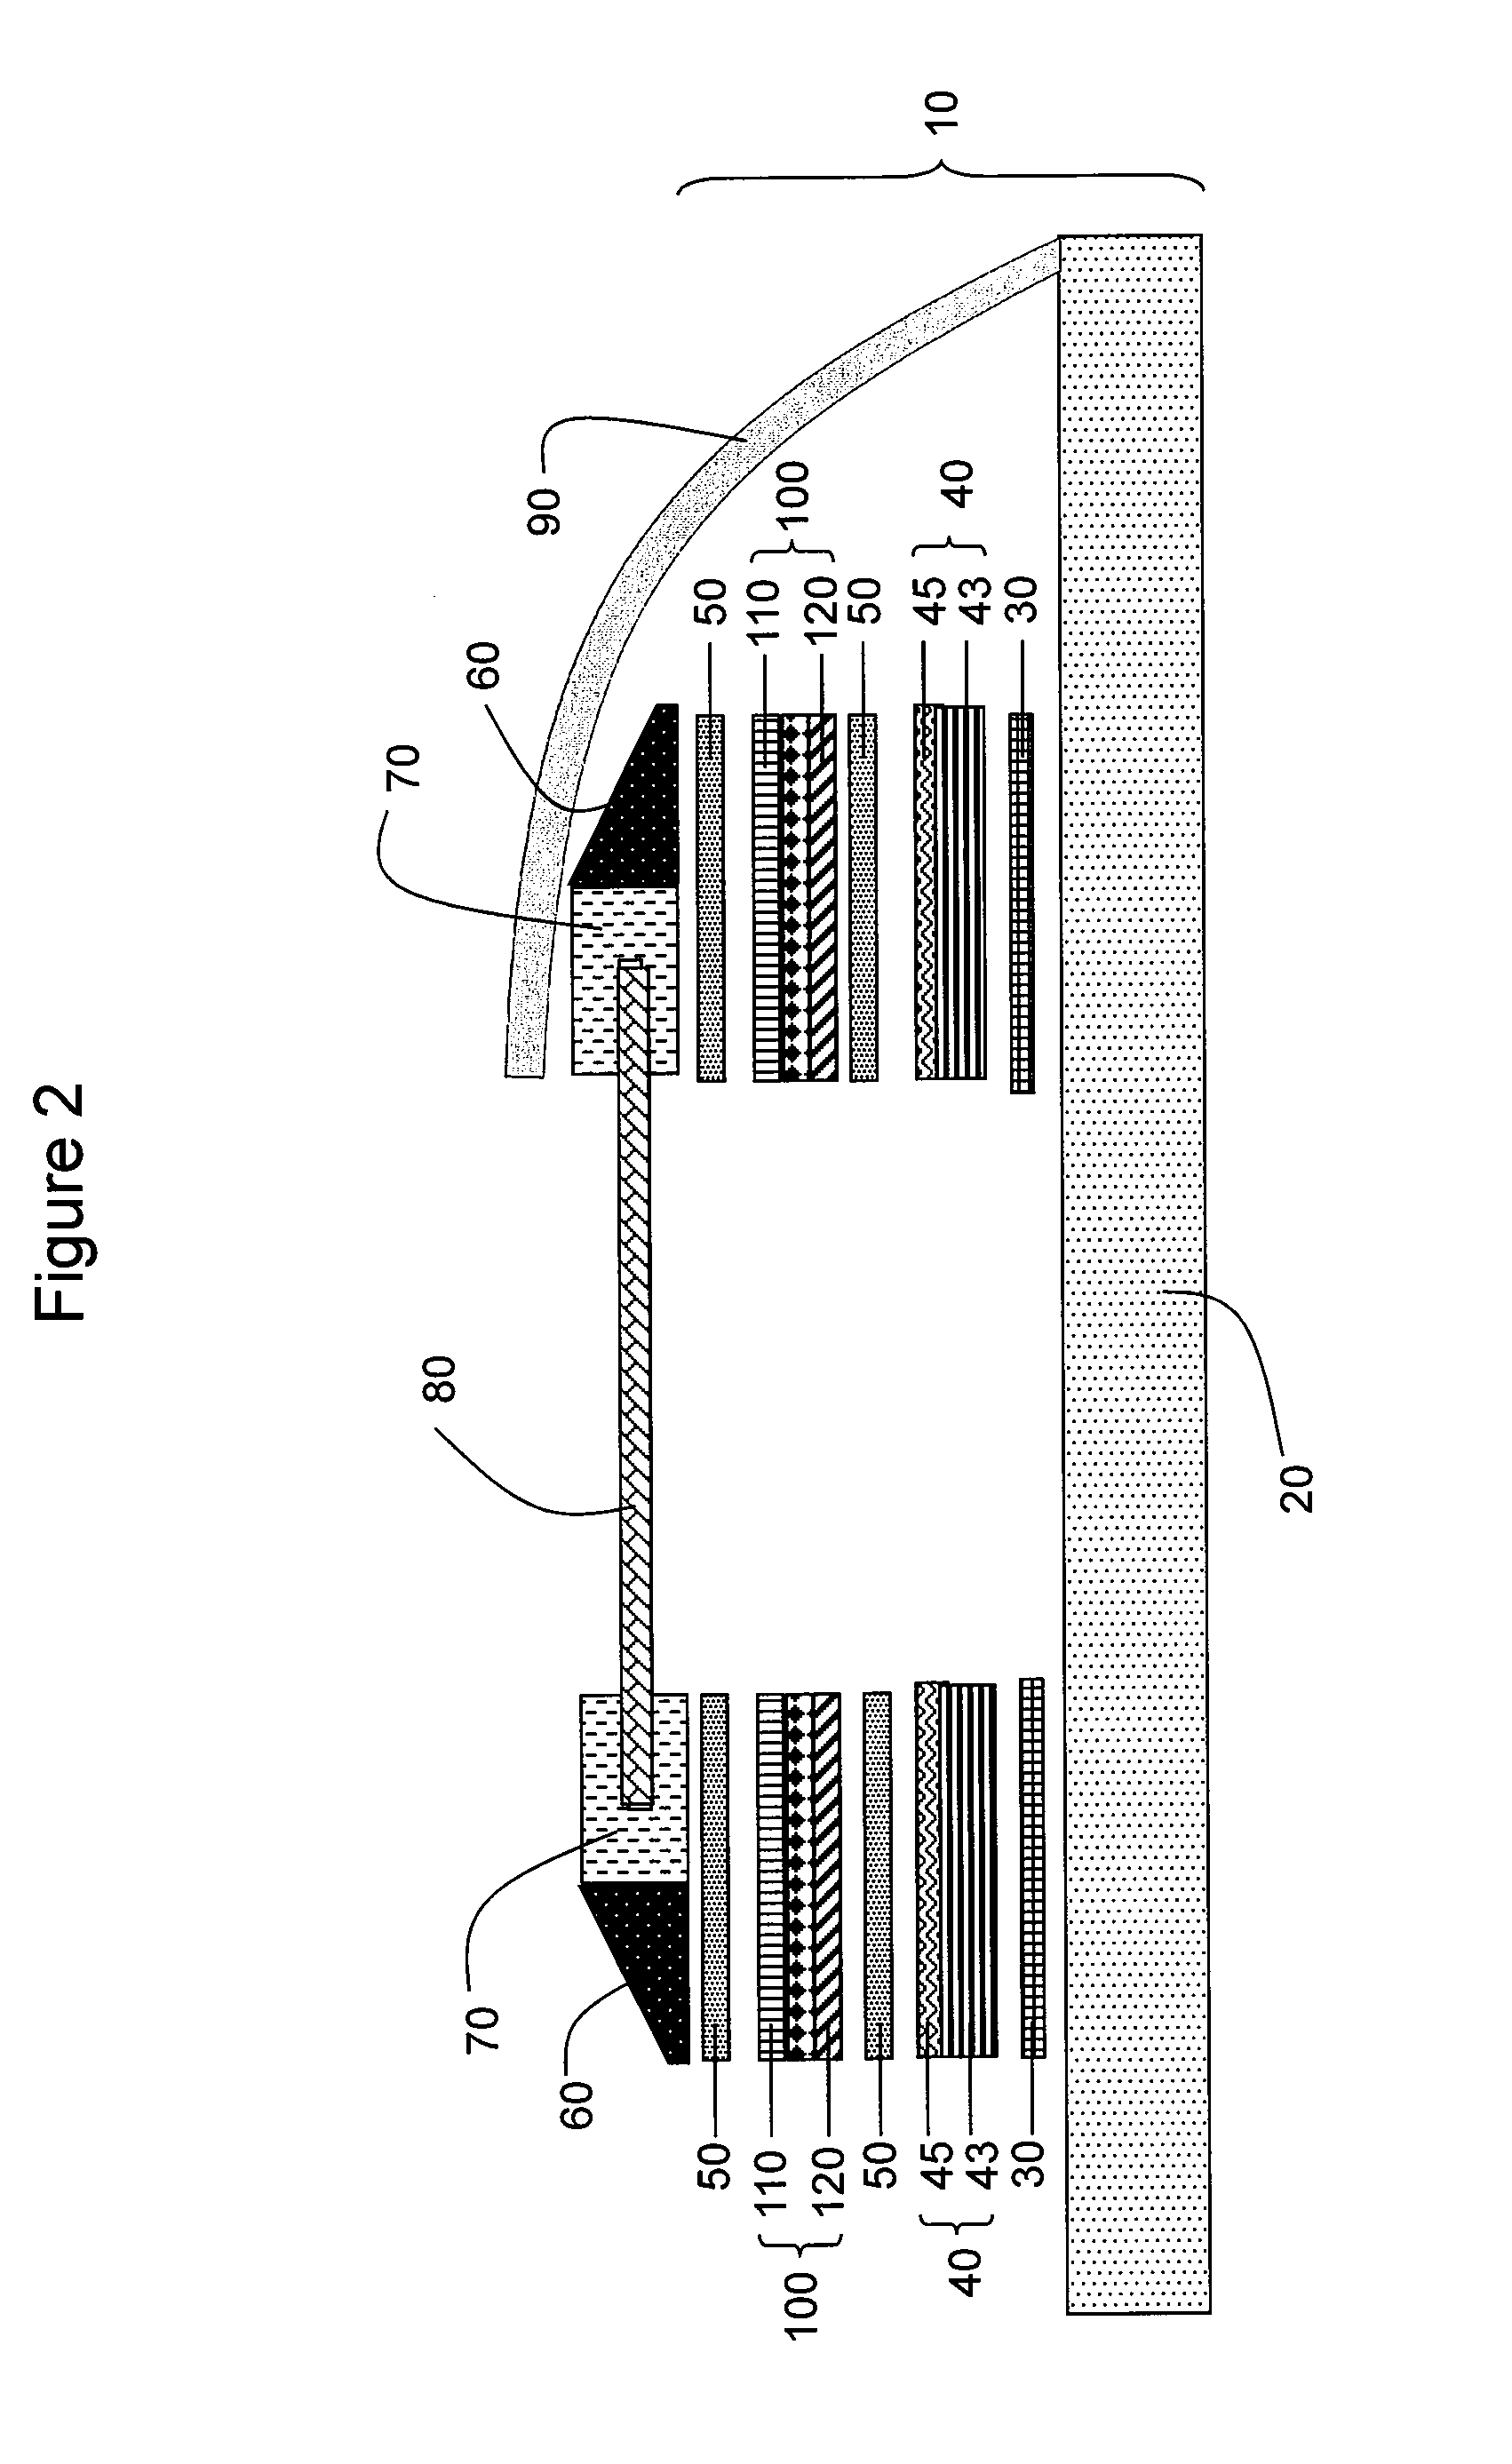 Attachment of photovoltaic devices to substrates using slotted extrusion members